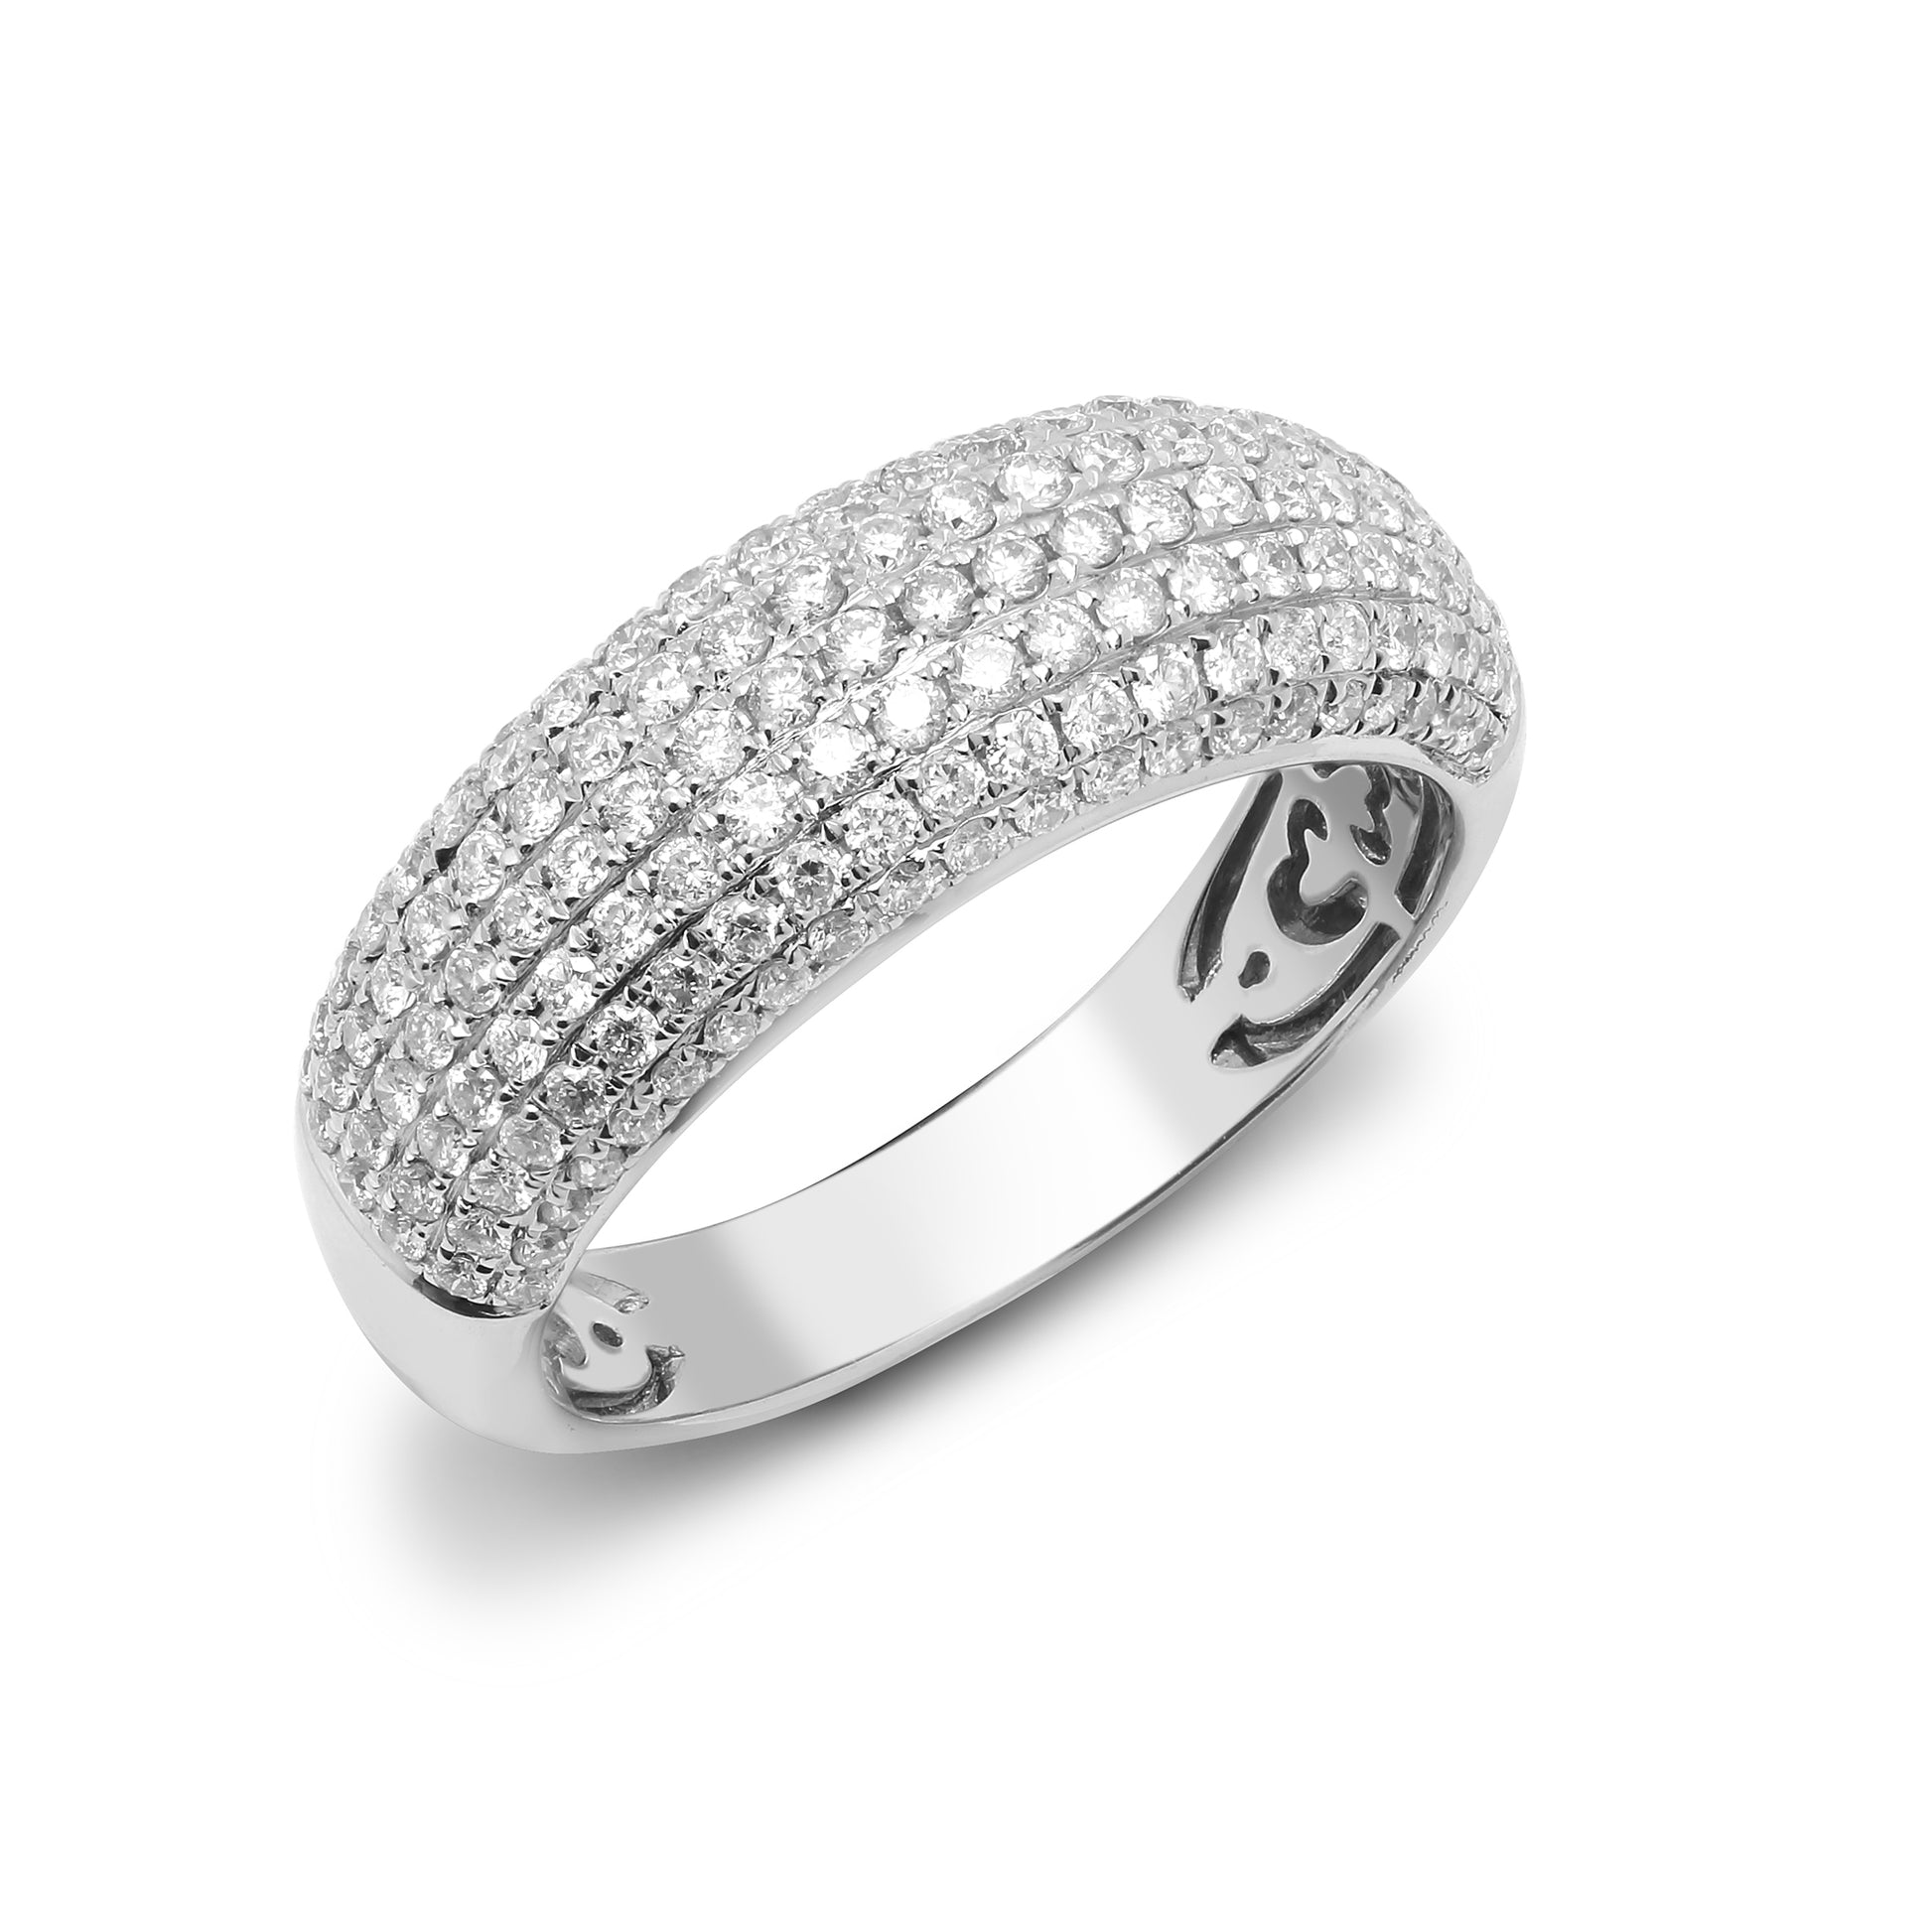 18ct White Gold  1ct Diamond Domed Bombe Eternity Ring 7mm - 18R904